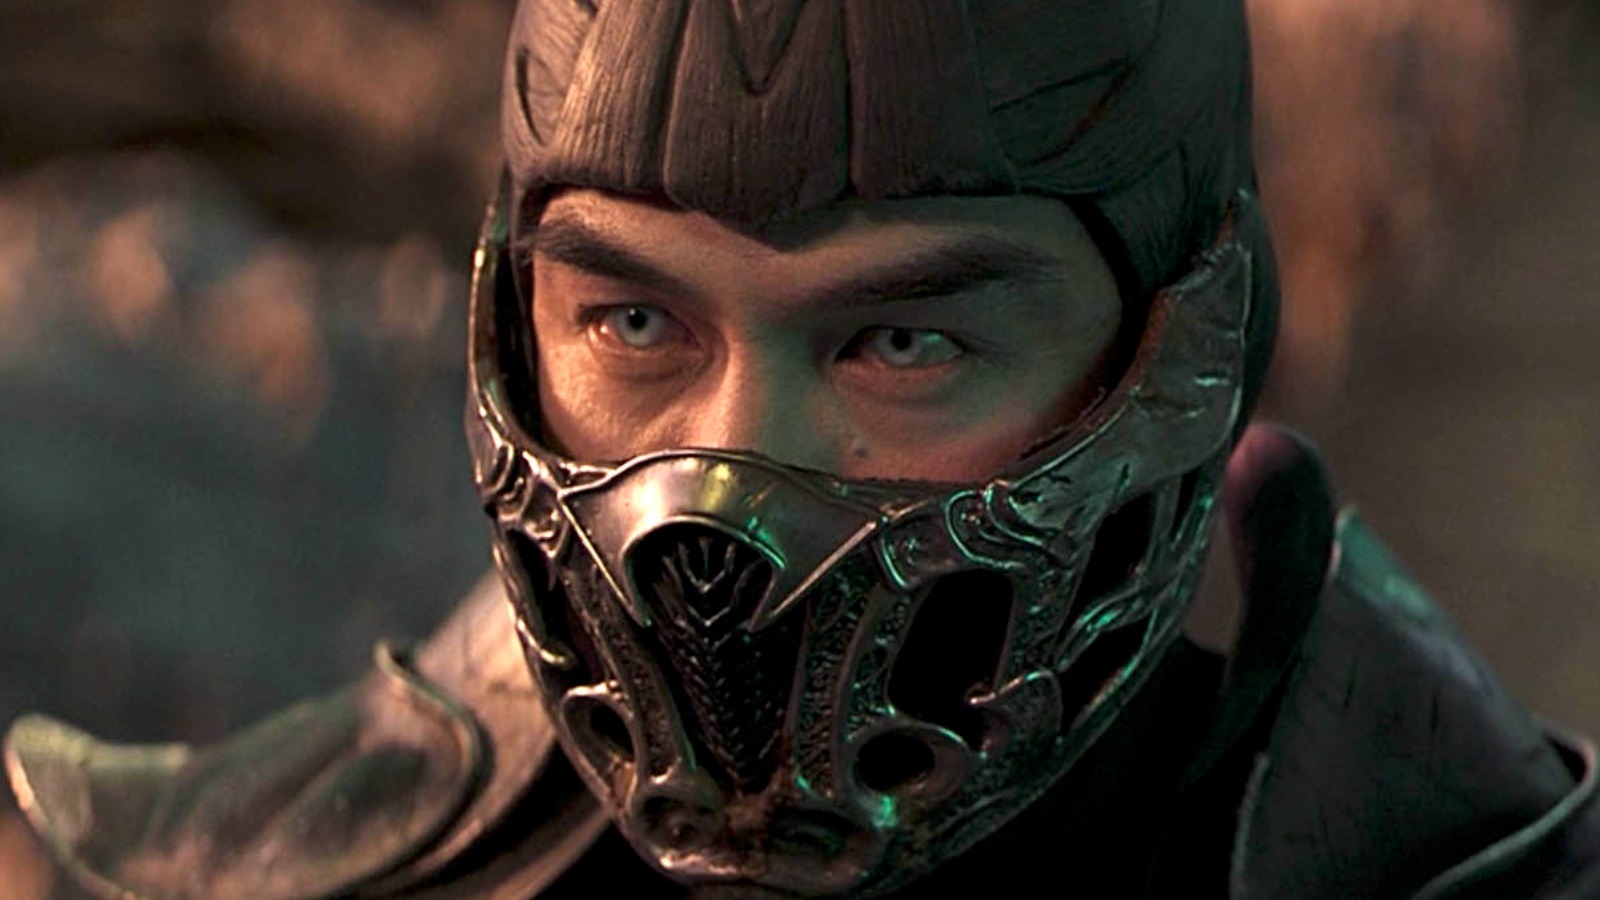 Mortal Kombat review - is the movie reboot a flawless victory?